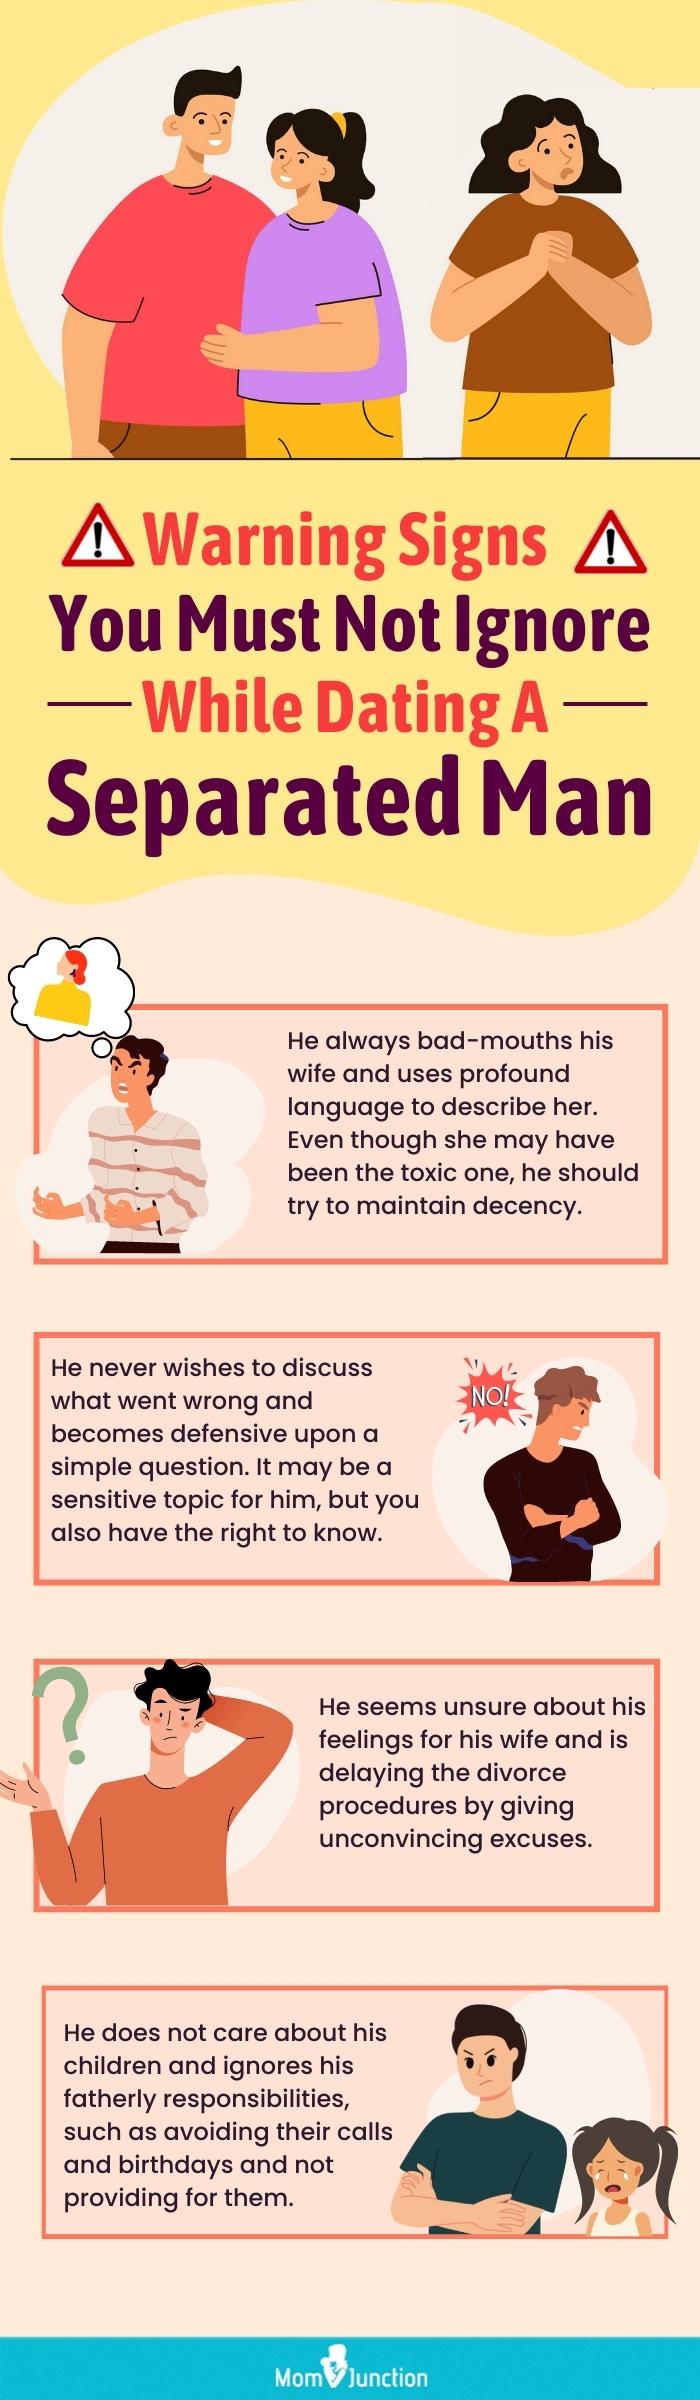 Dating A Separated Man 10 Things You Need To Know